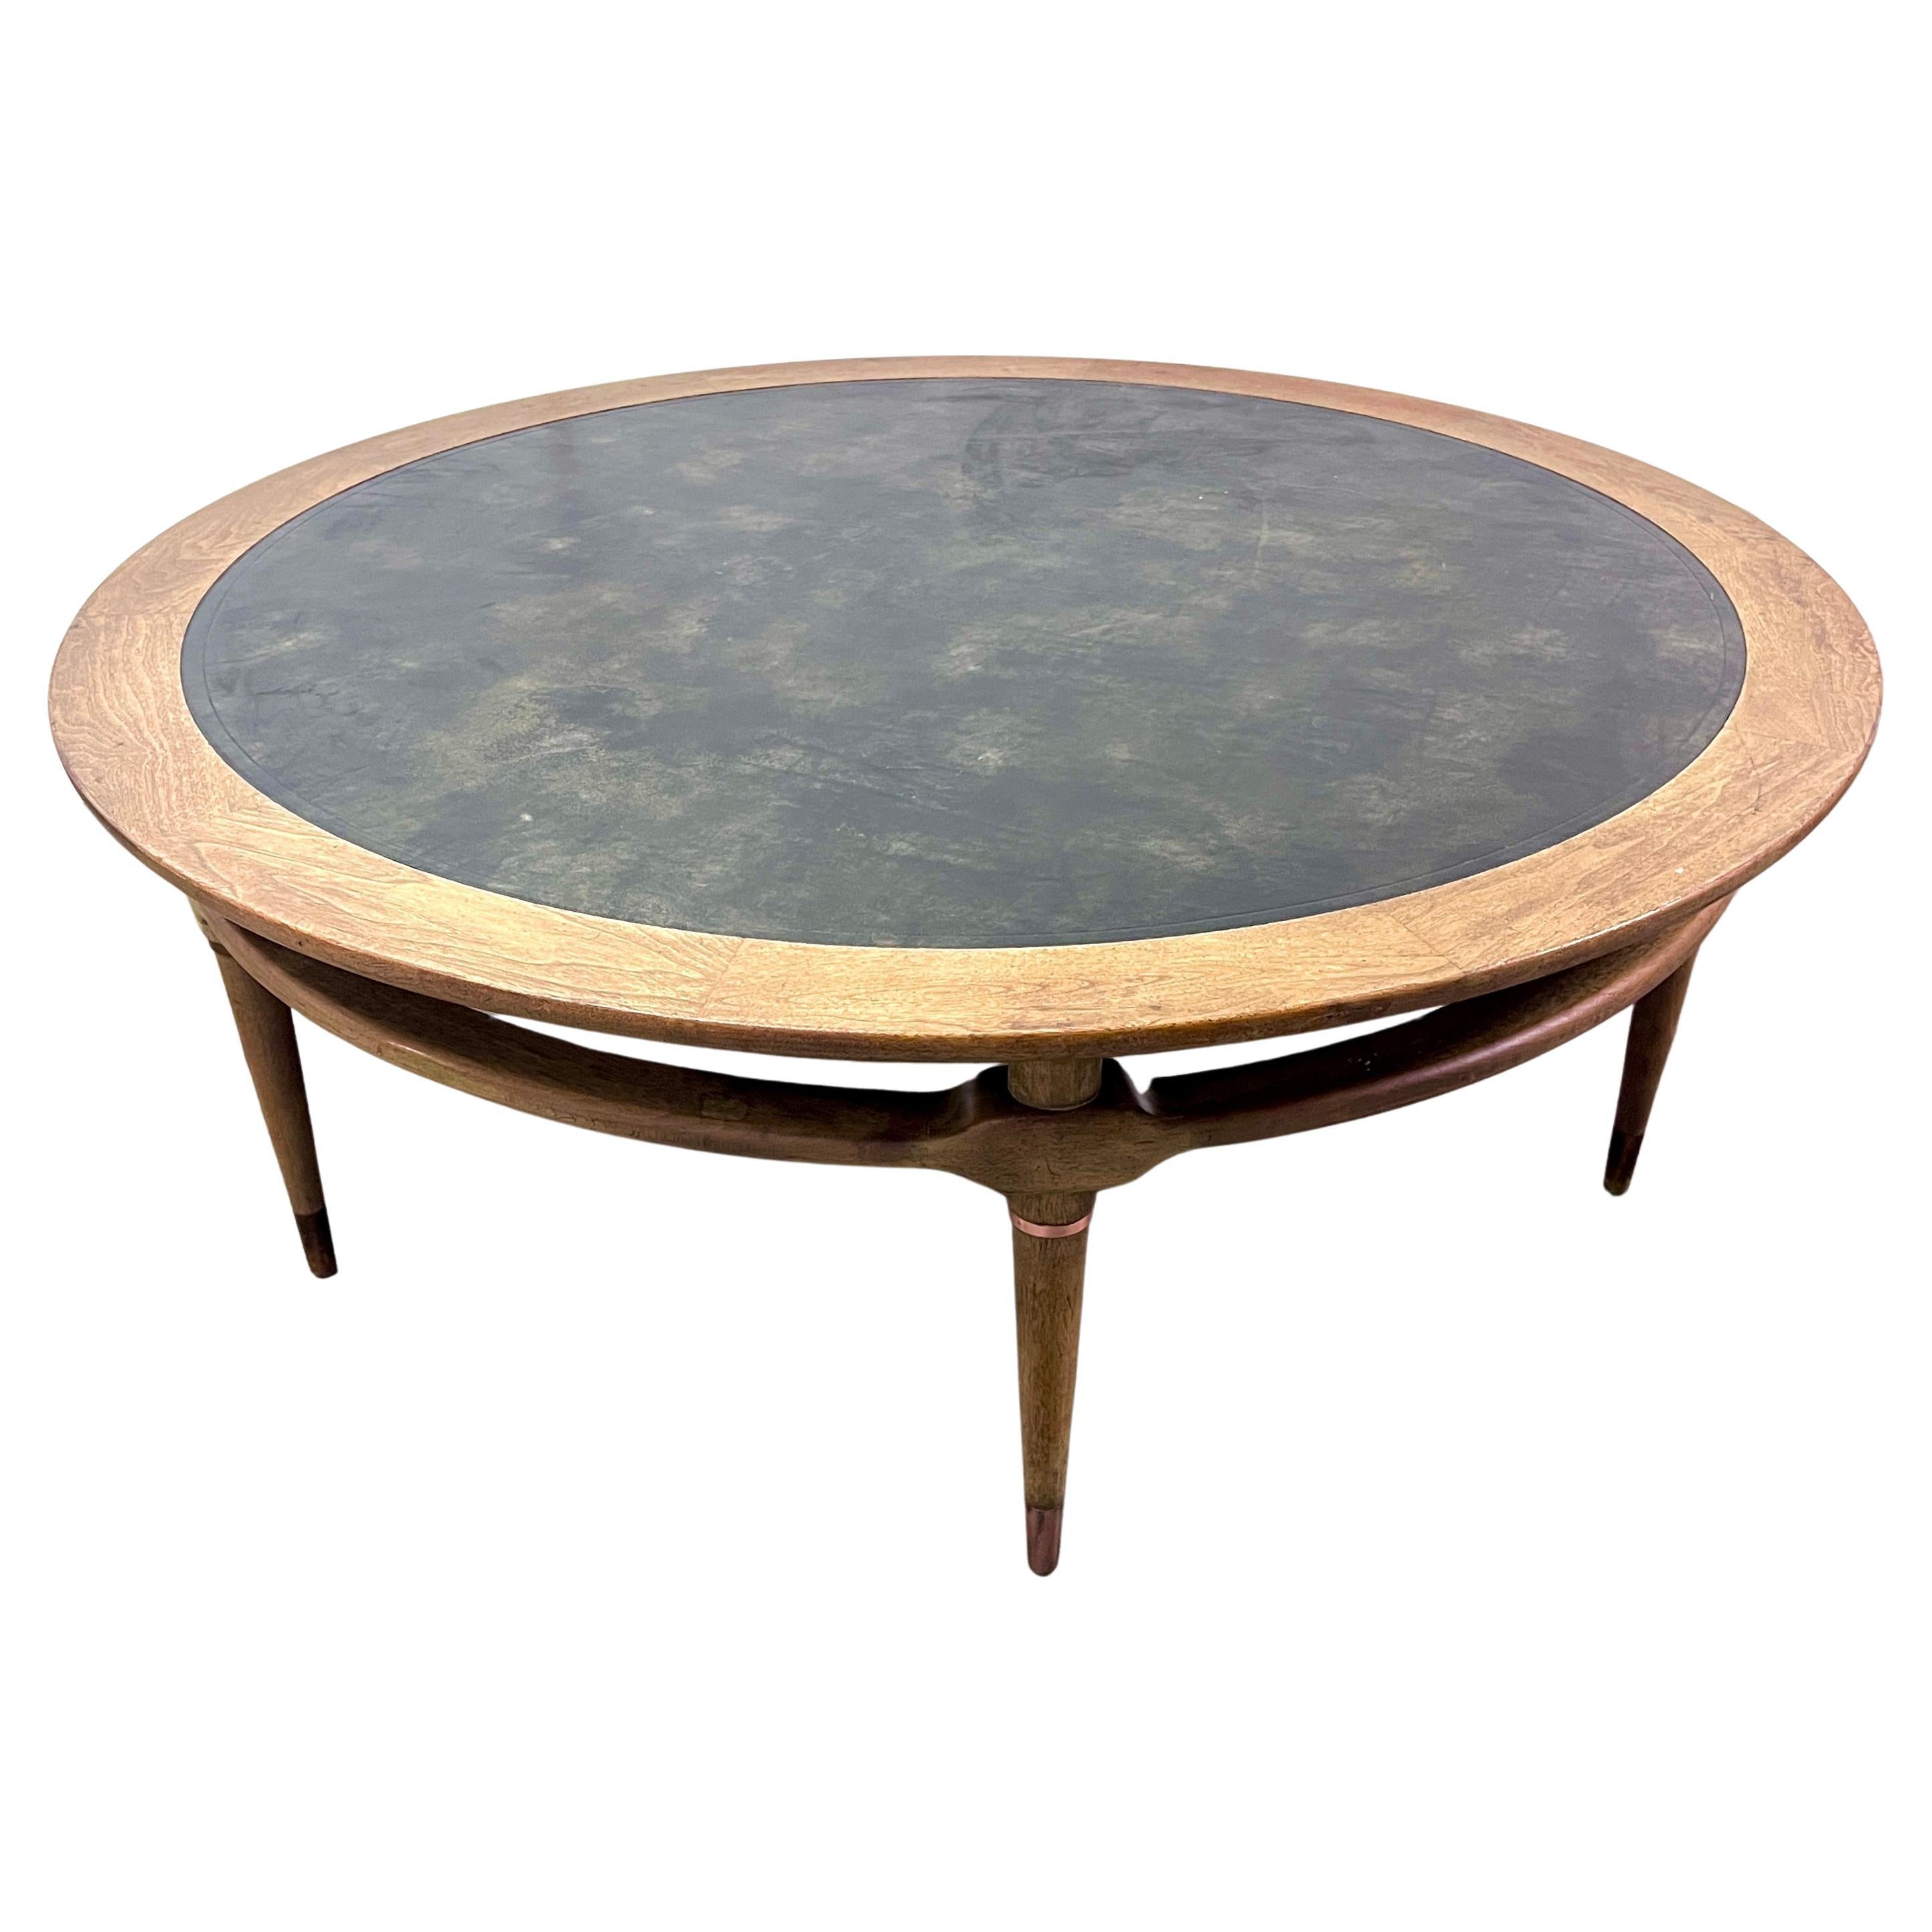 52" Round Cocktail Table Tooled Leather Top in the Style of Robsjohn-Gibbings For Sale